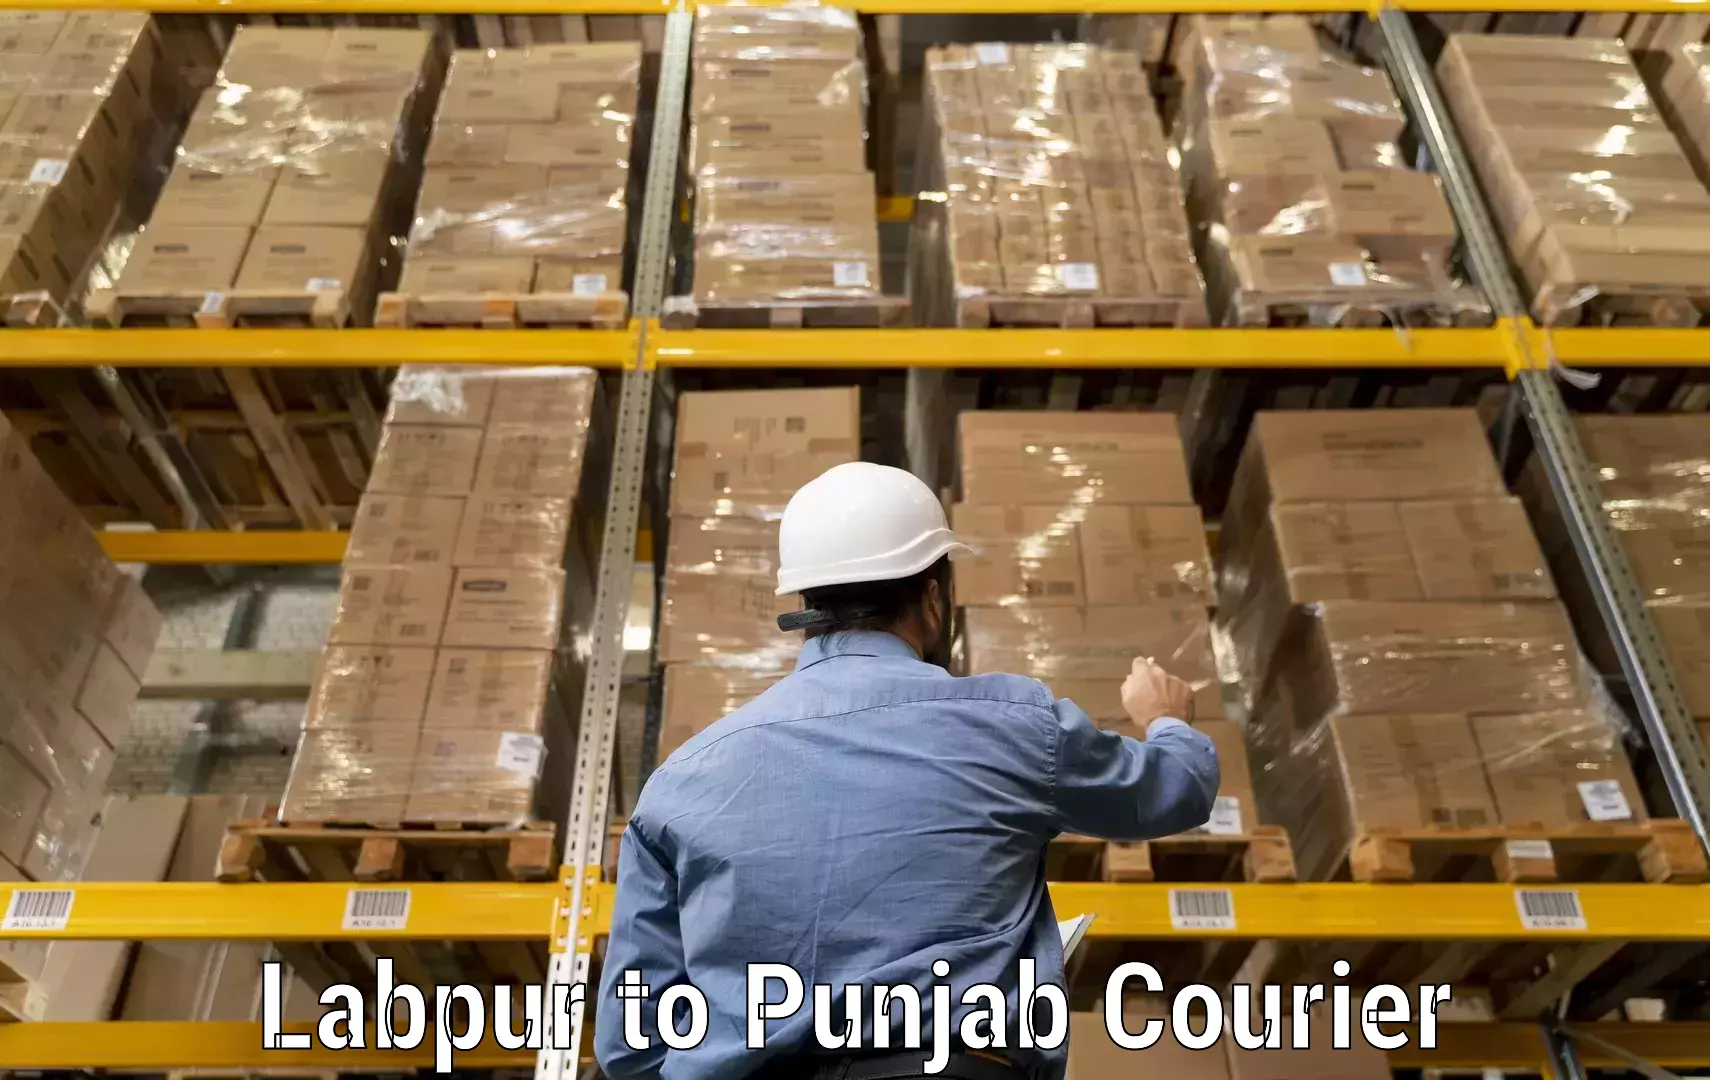 Global shipping networks Labpur to Mohali